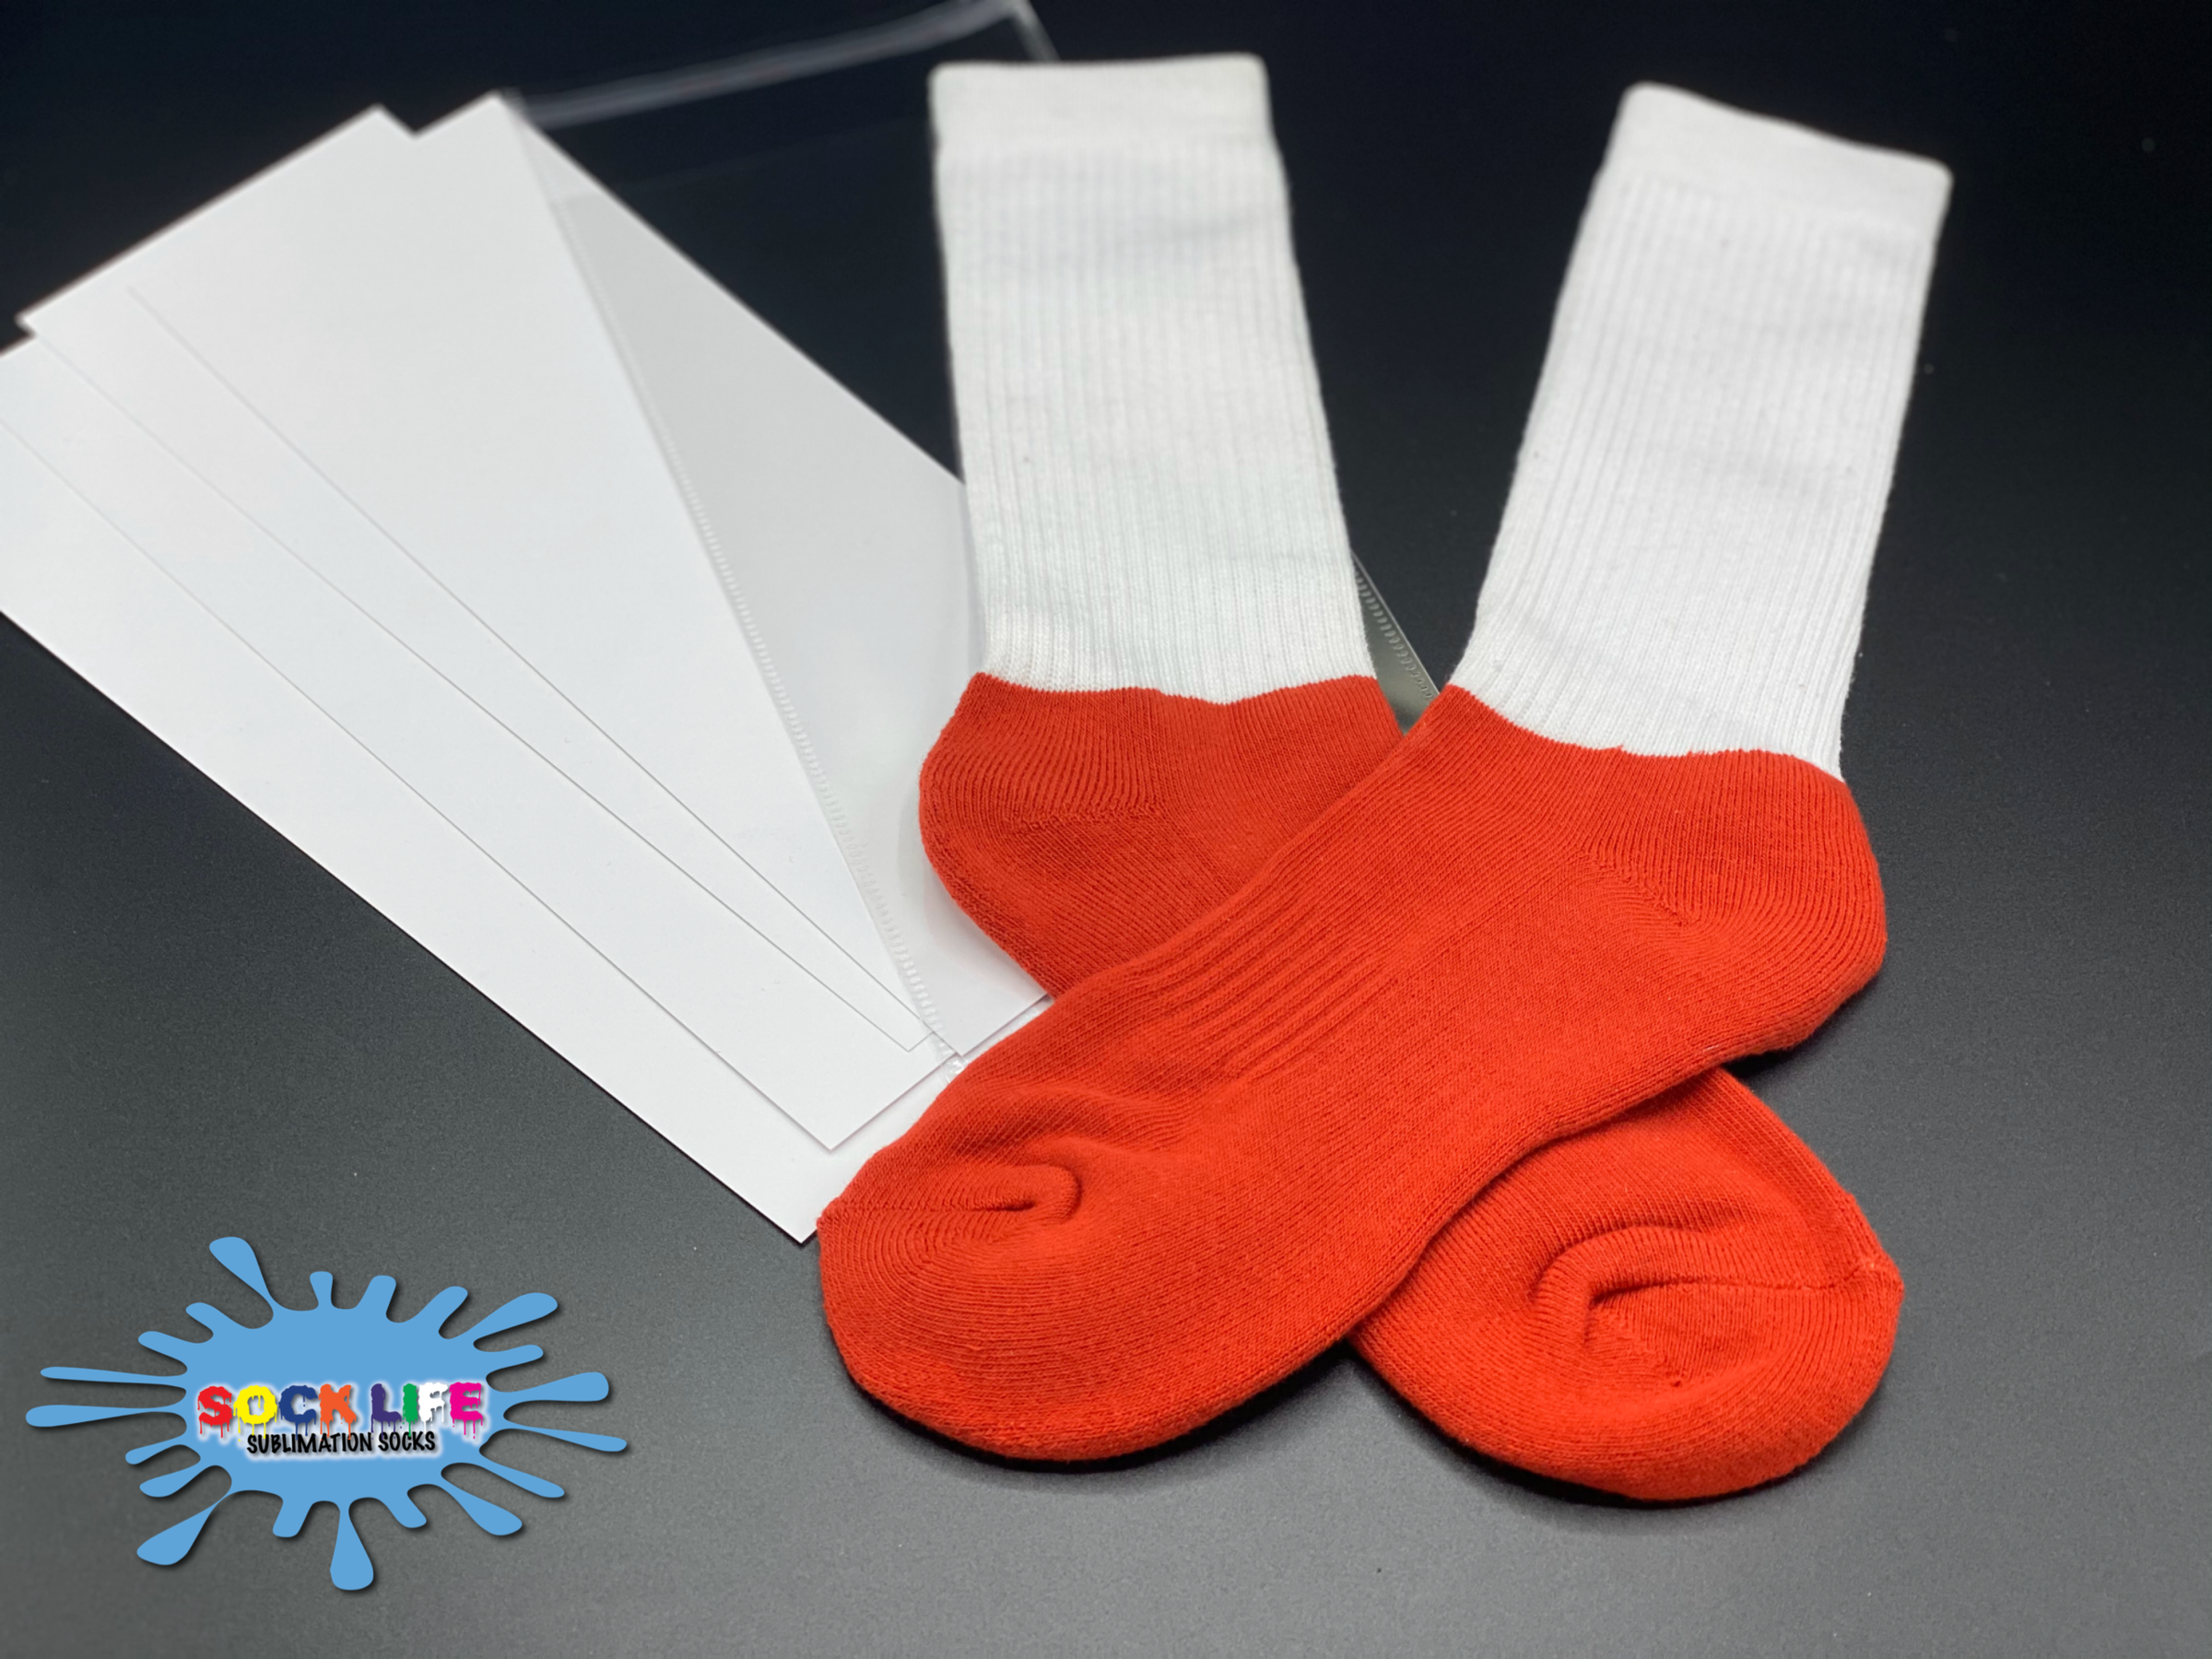 How to Sublimate Socks